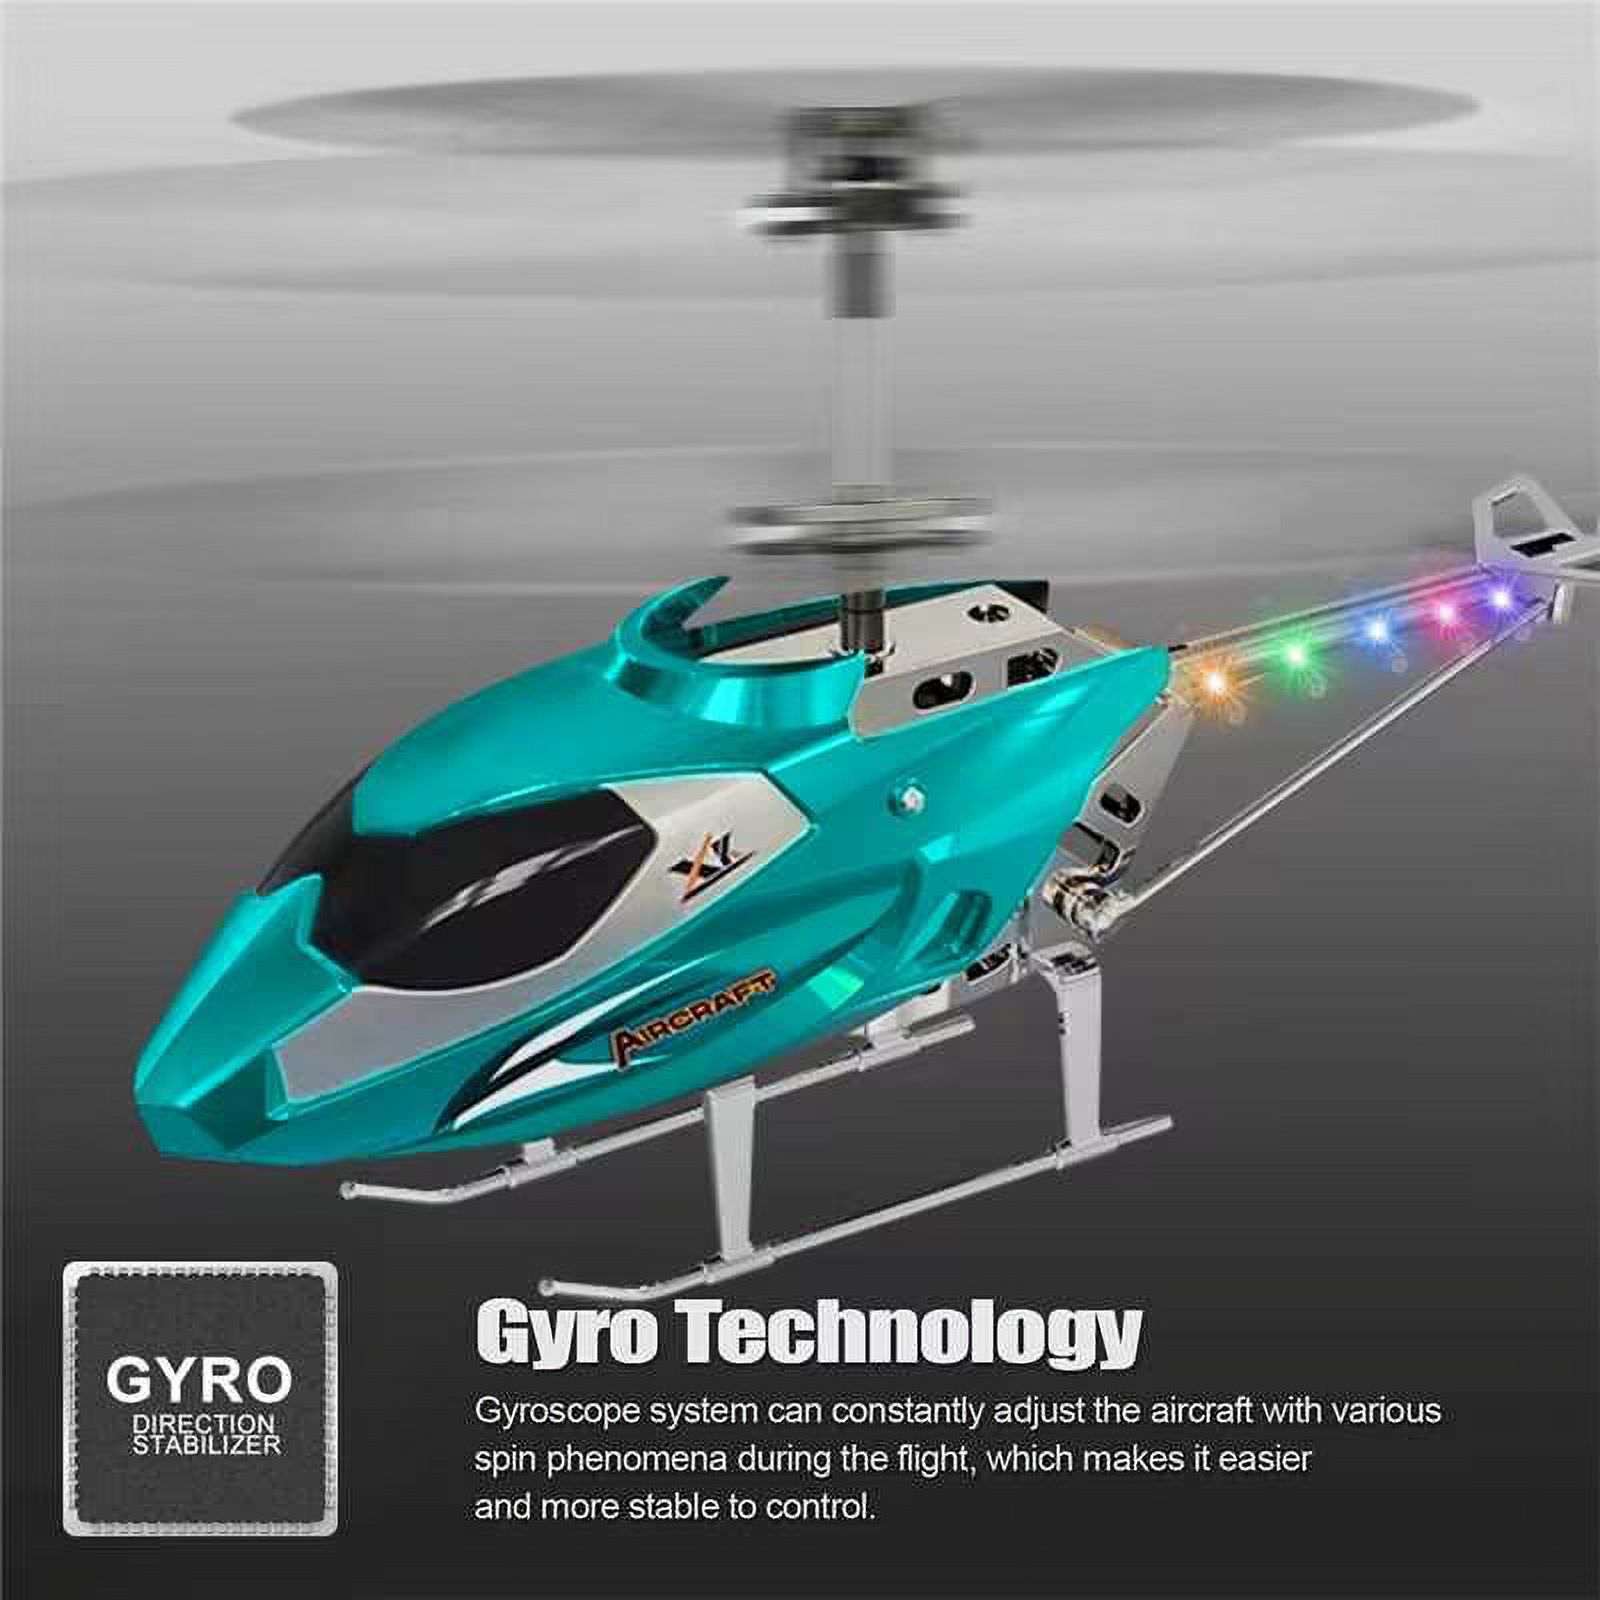 PayUSD Remote Control Helicopter Mini Gyroscope RC Helicopters LED Light for Indoor to Fly for Kids and Beginners, Blue - image 3 of 8